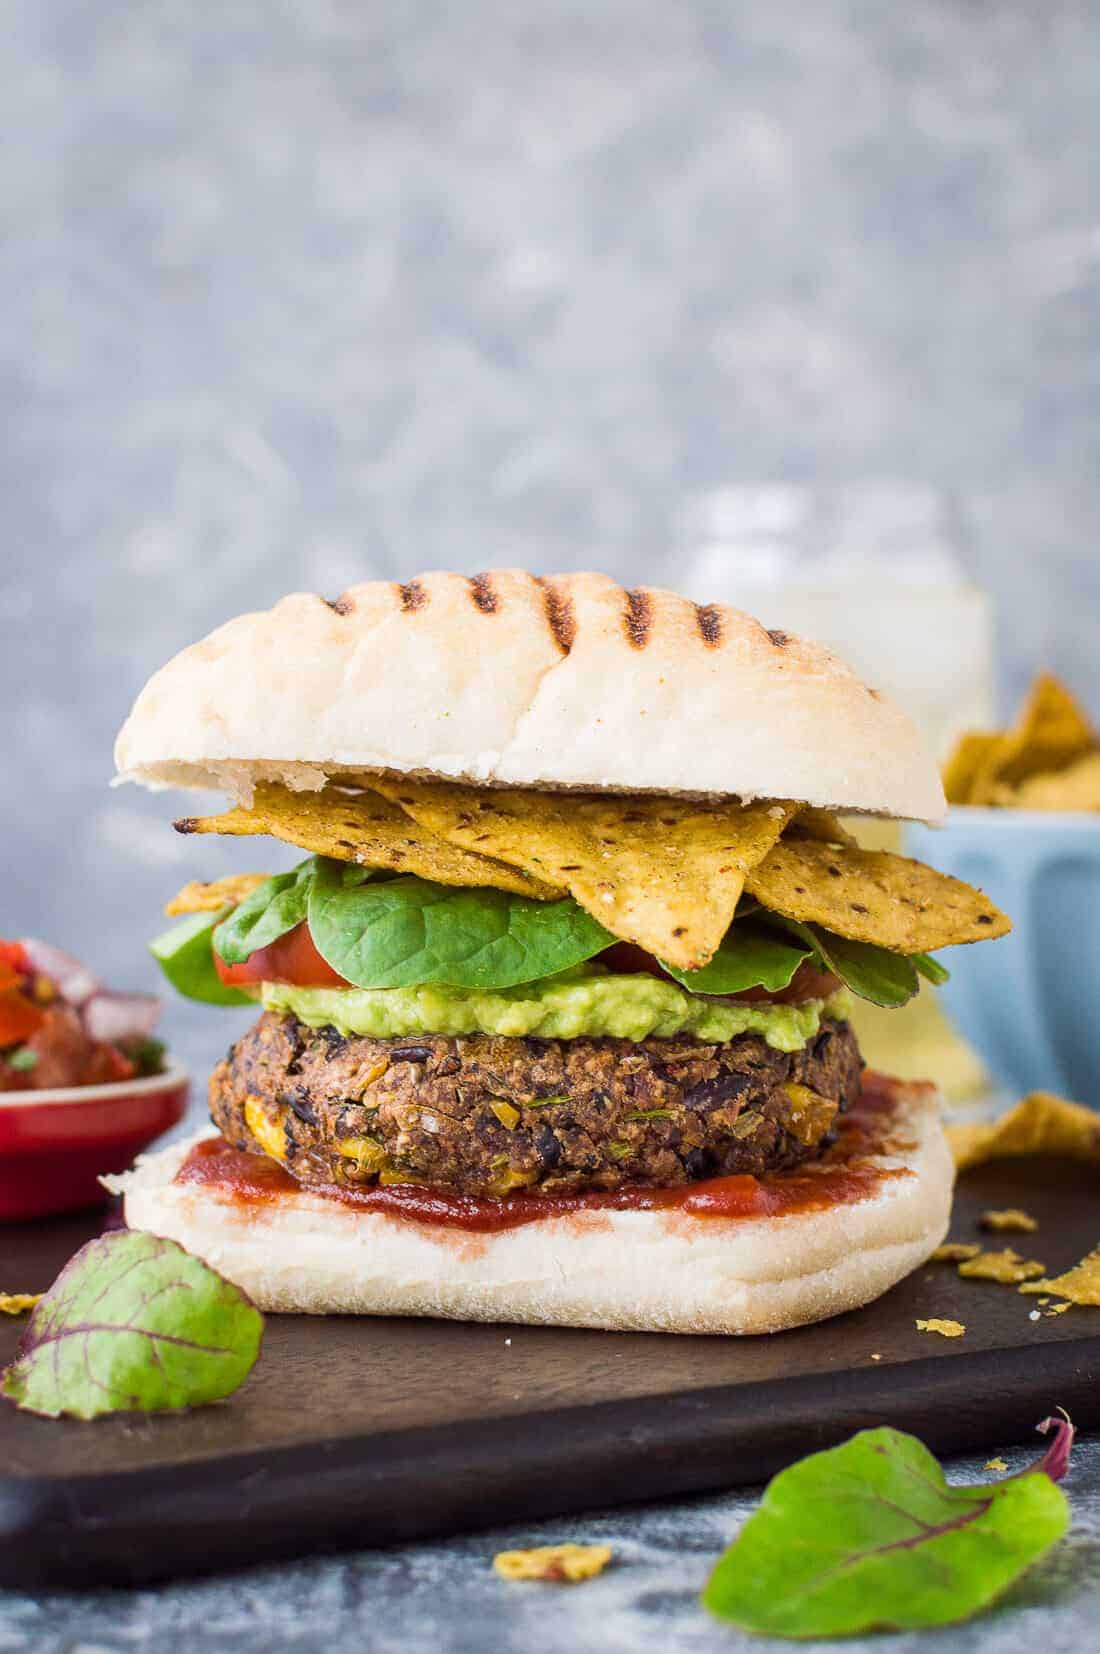 Vegan Mexican Bean Burgers – spicy black and kidney bean burgers with sweetcorn and chipotle. One of your five a day per burger! #vegan #beanburger #plantbased #mexican #texmex #burger